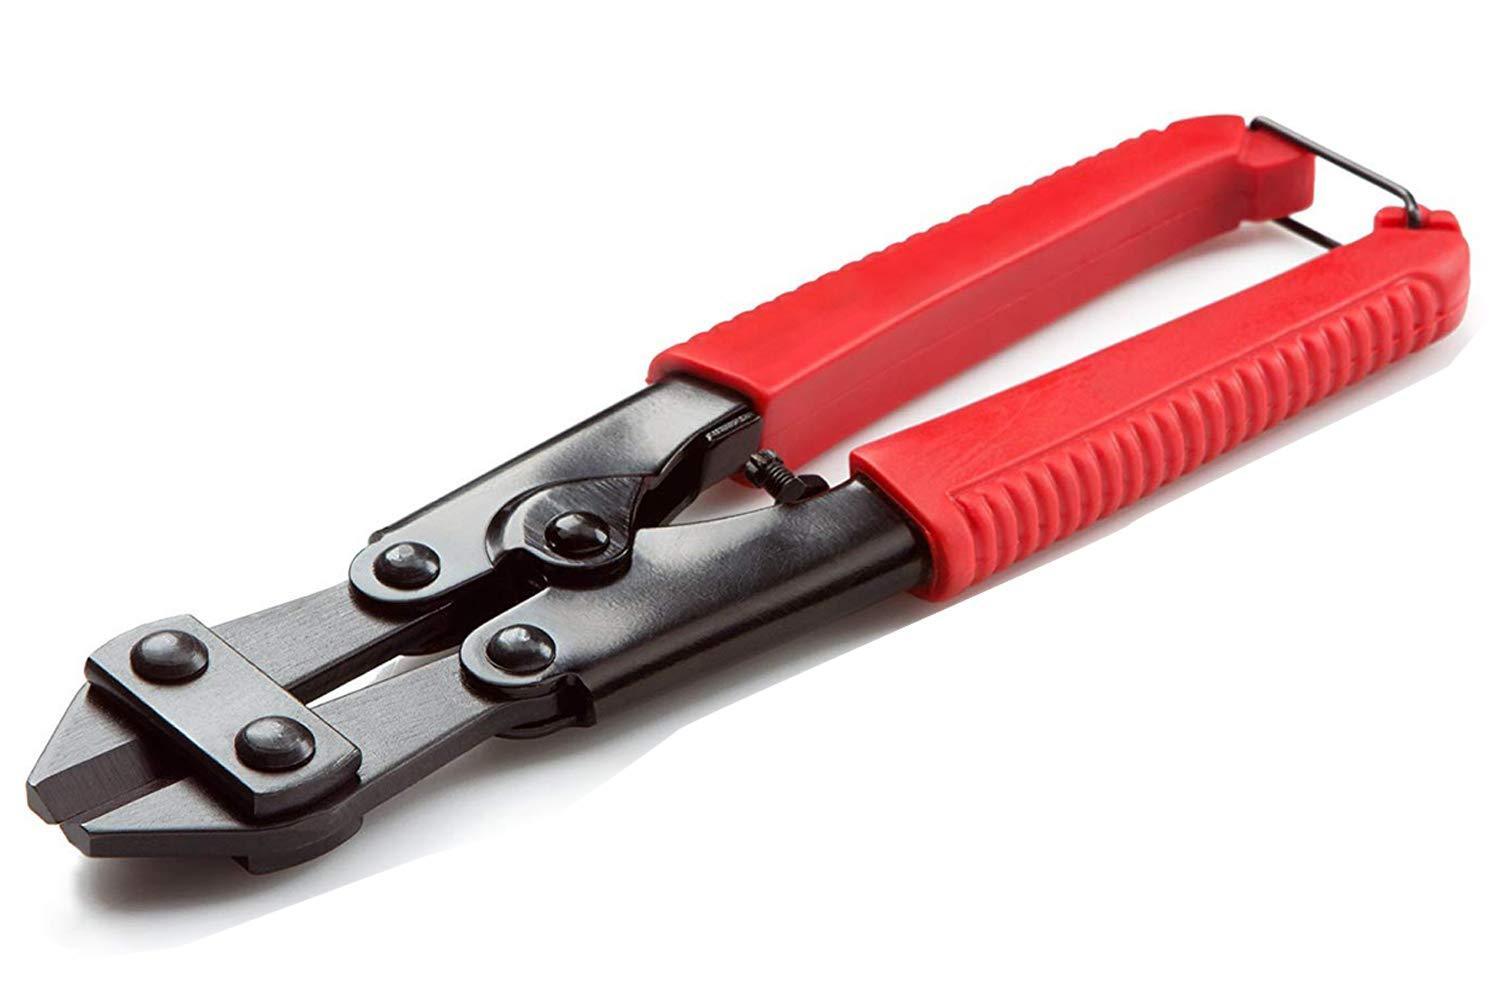 8-inch-mini-bolt-and-wire-cutter-bolt-clipper-cable-cutter-wire-clamp-cutting-mini-bolt-cutter-combination-snap-ring-plier-length-8-inch